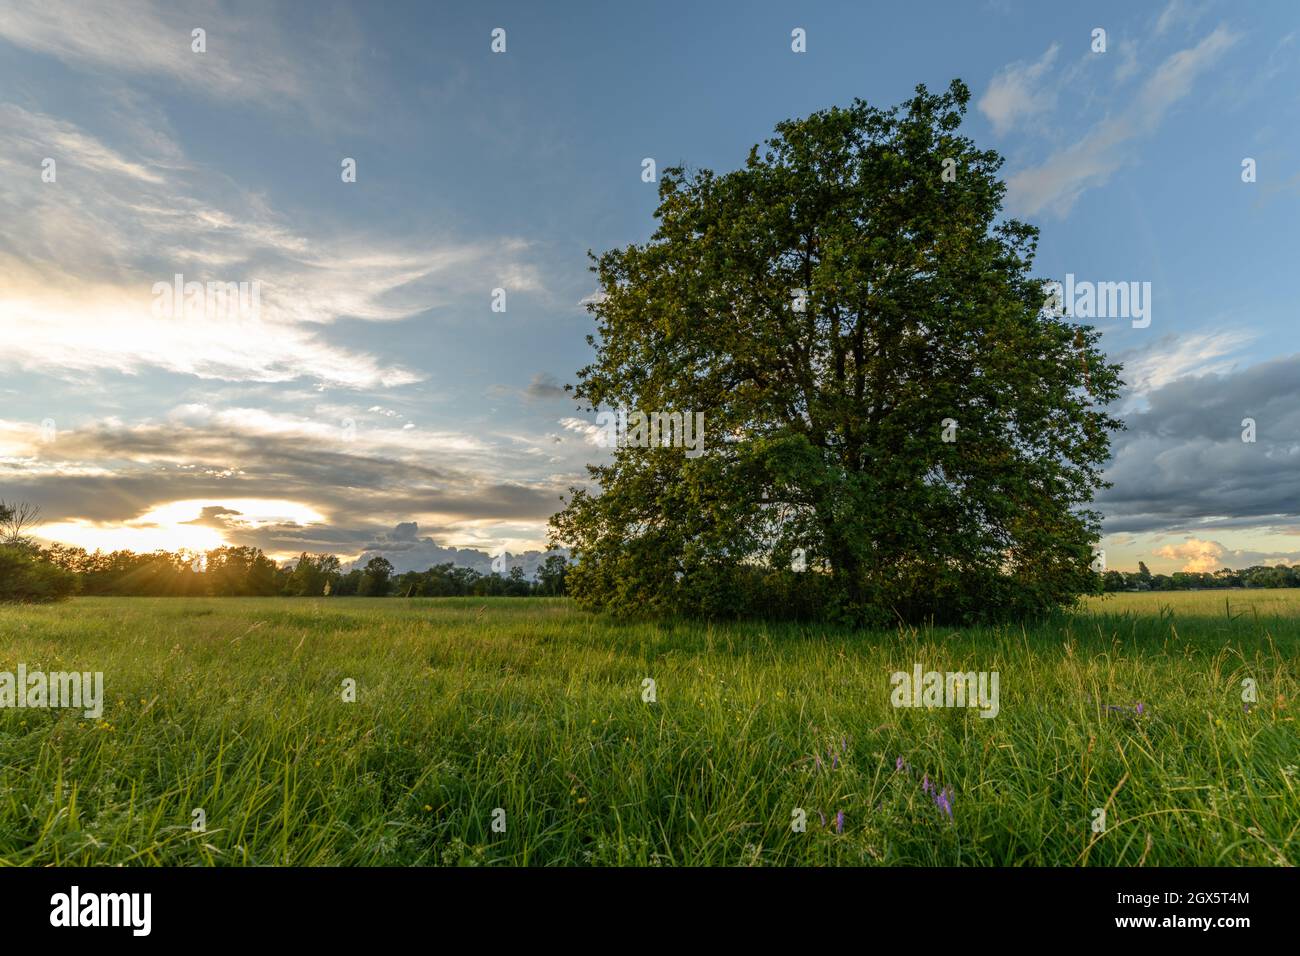 Large oak tree isolated in a meadow at sunset. Alsace, France. Stock Photo